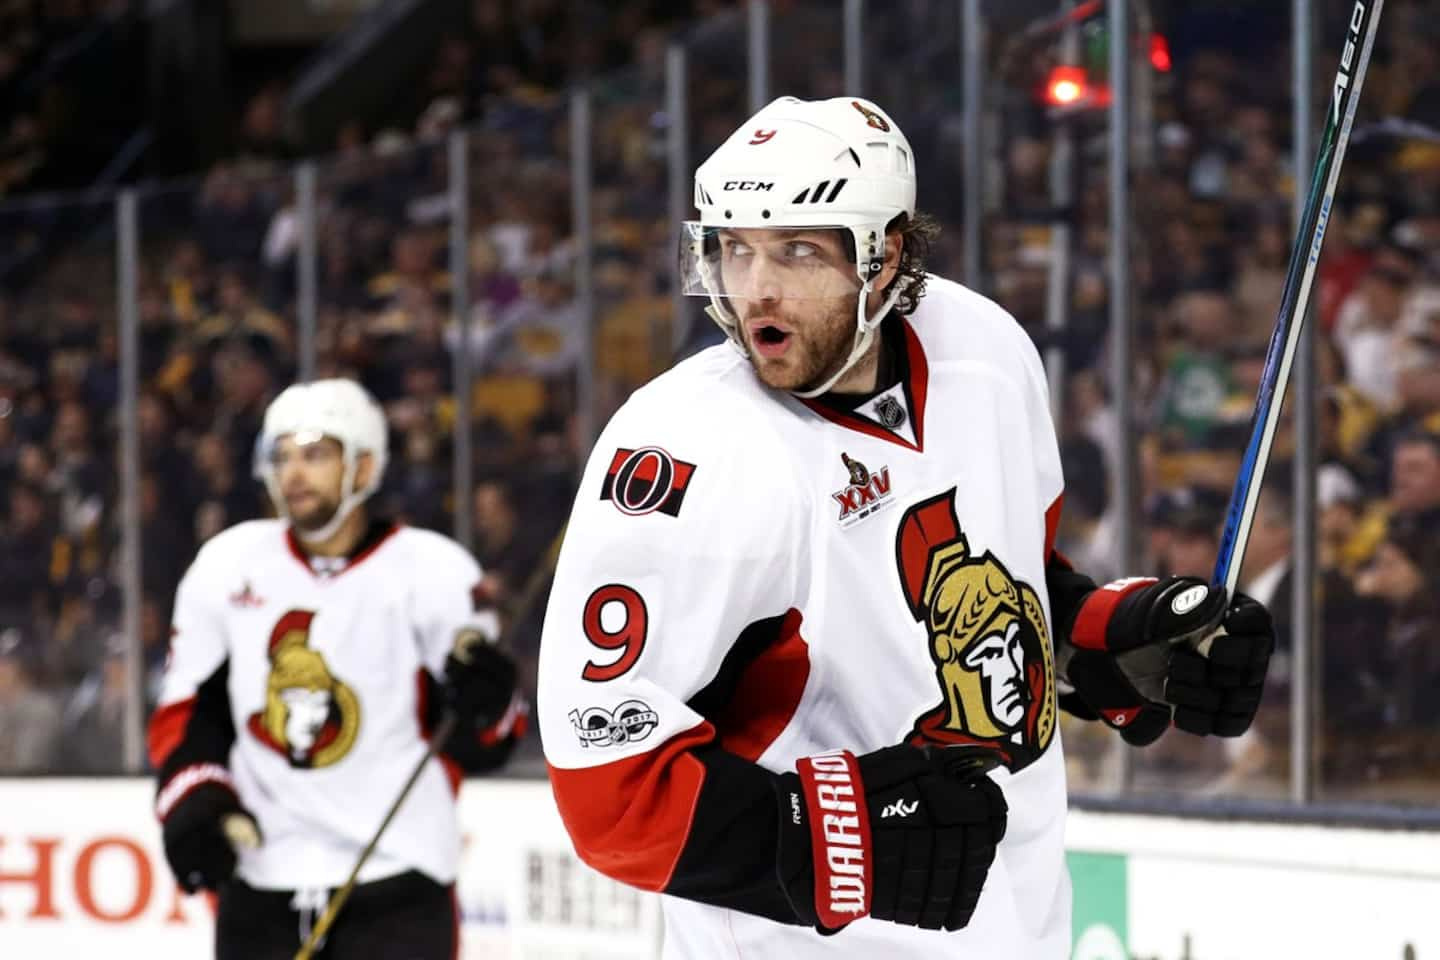 A relapse for Bobby Ryan